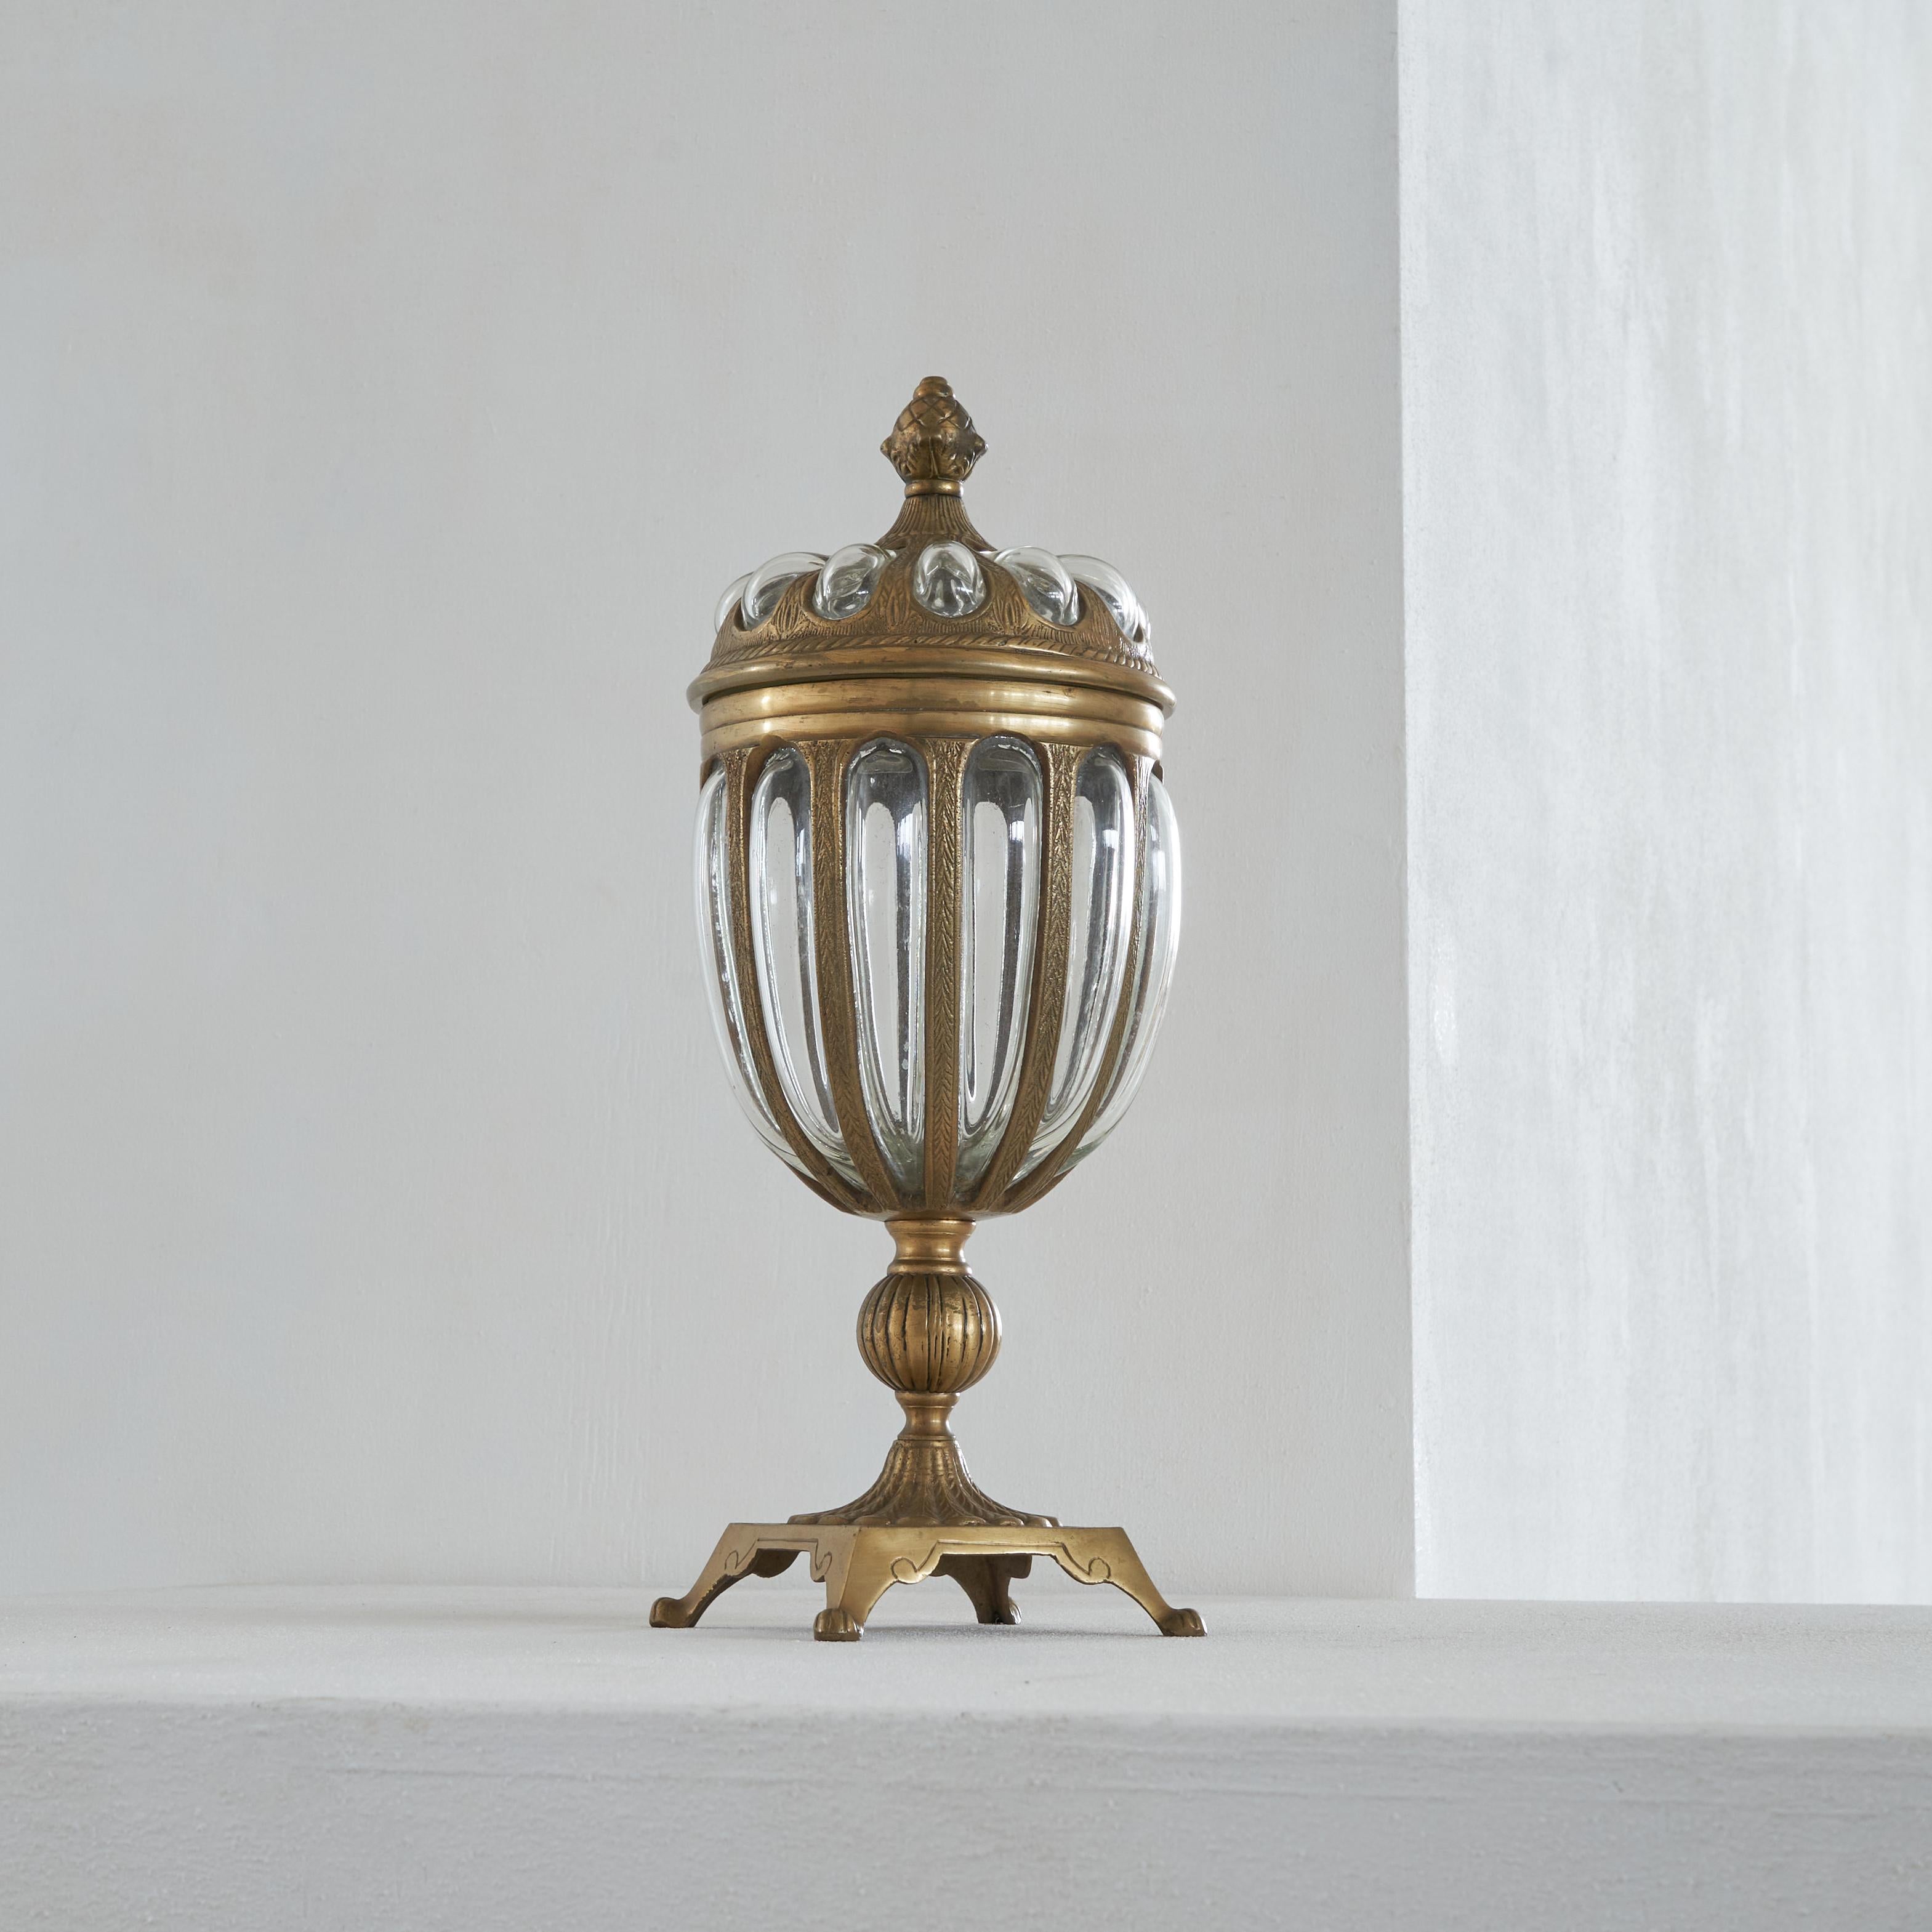 Large Lidded Apothecary Jar in Brass and Glass.

Very decorative large apothecary jar in patinated brass and hand blown bubble glass. Distinct piece. Wonderful decoration on every part and heavy quality. Great for display on a table, center table,